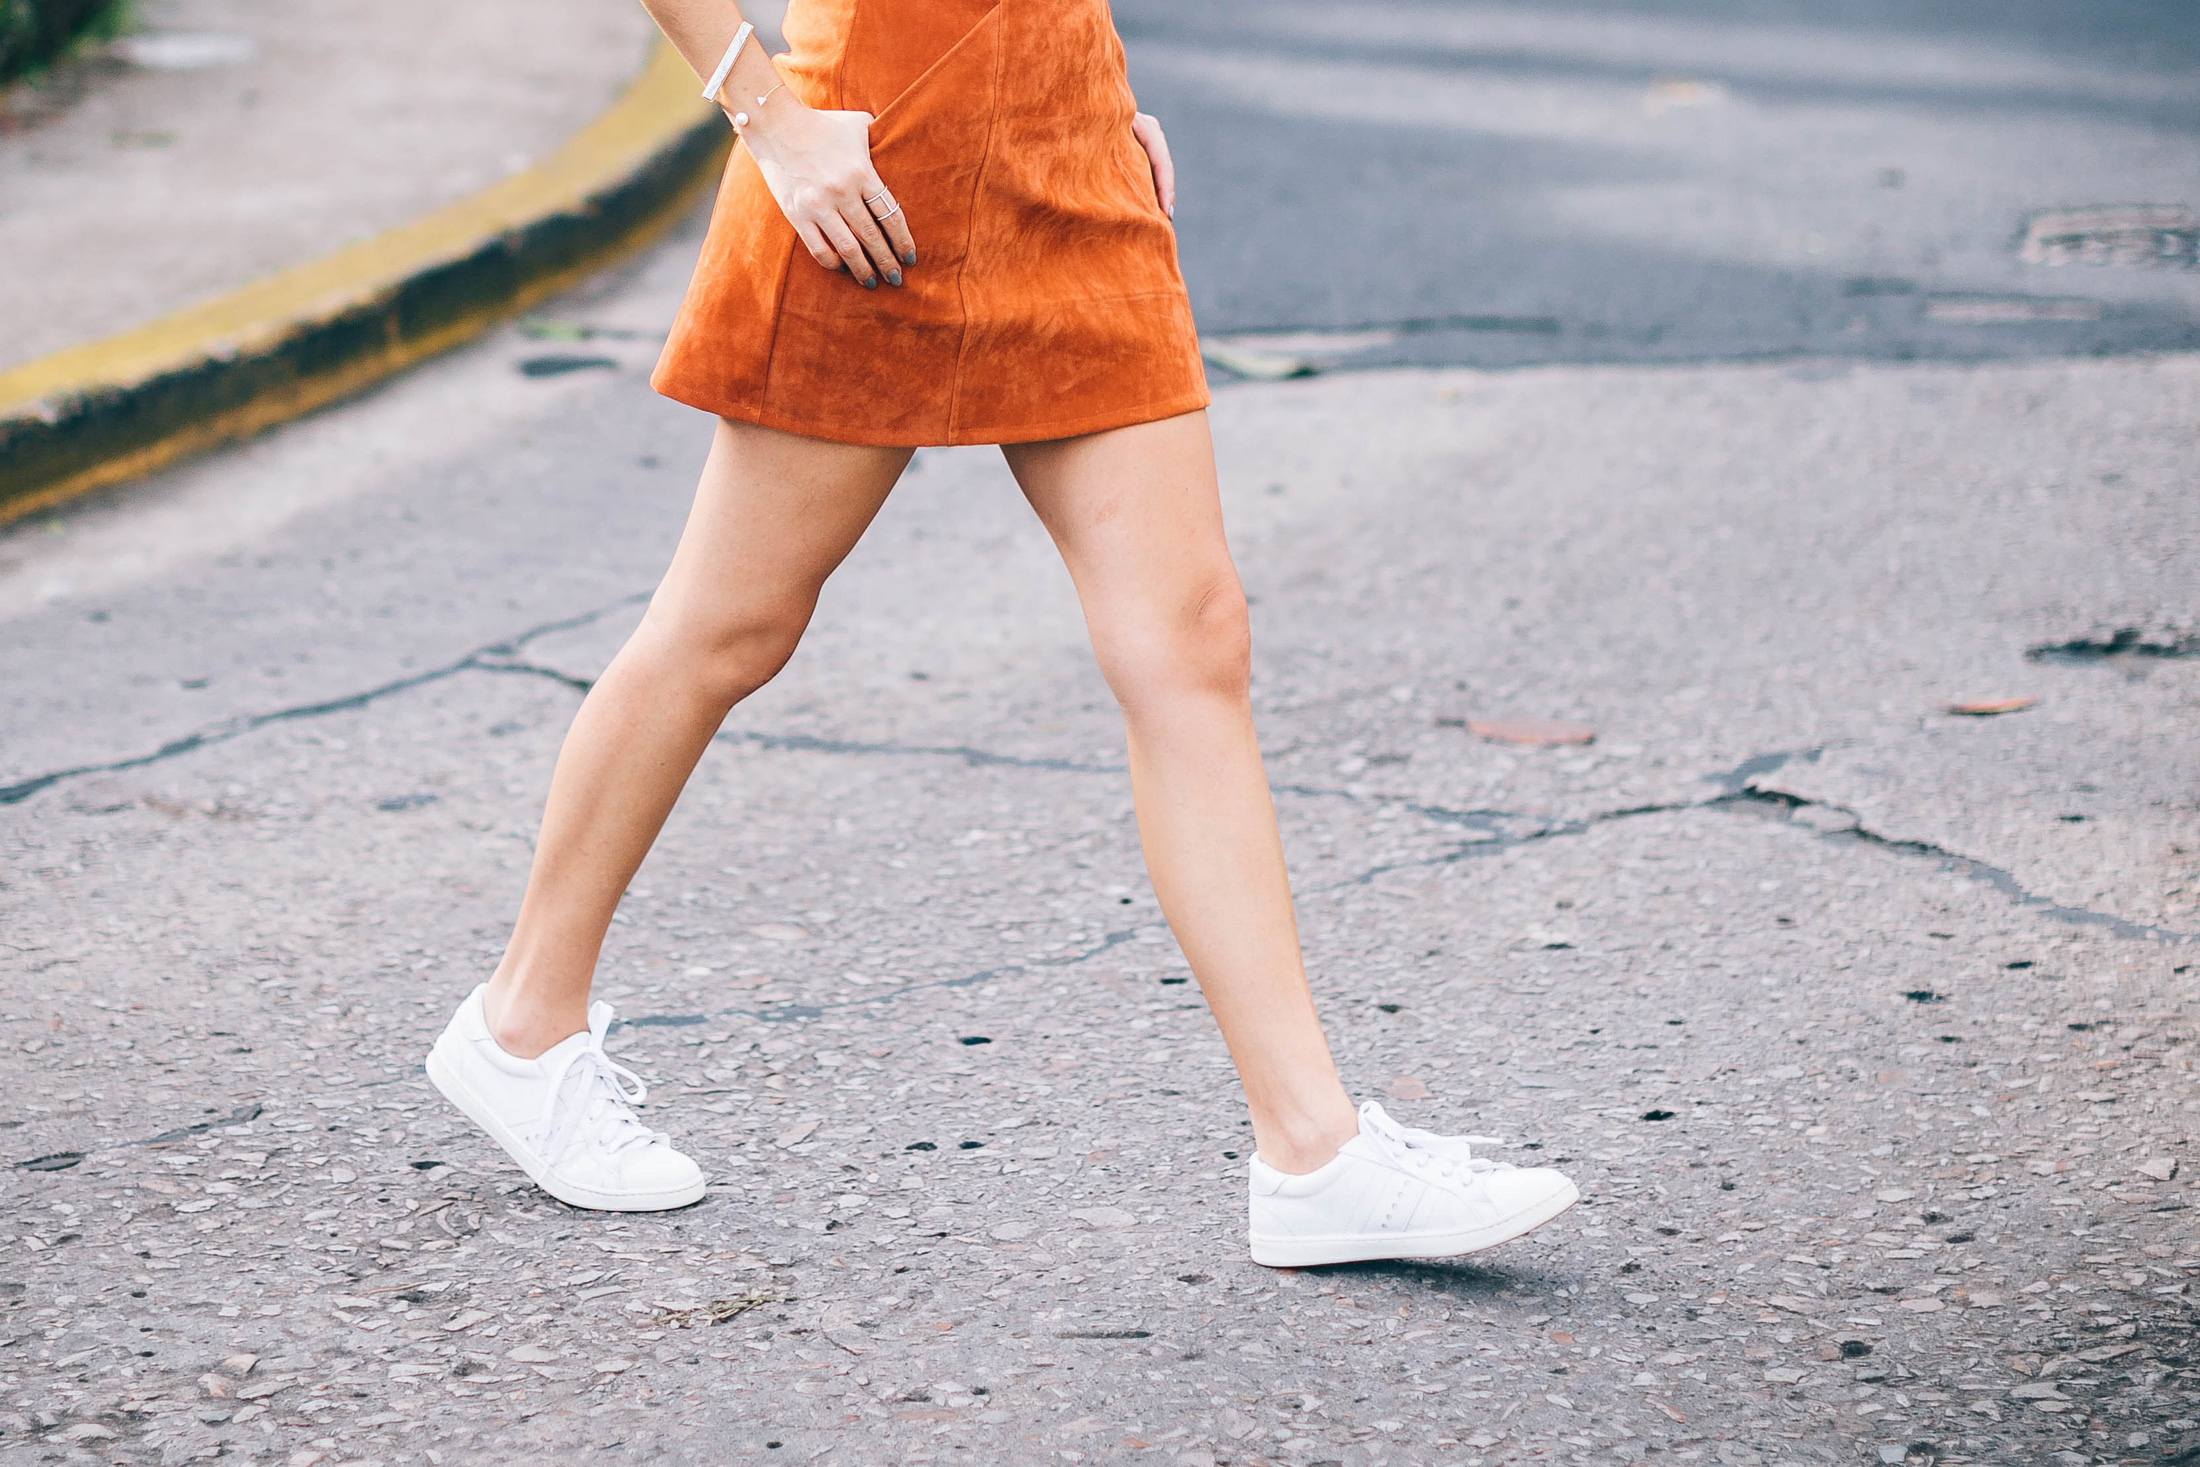 White Adidas style Zara leather sneakers and orange suede A Line Skirt by Minkpink